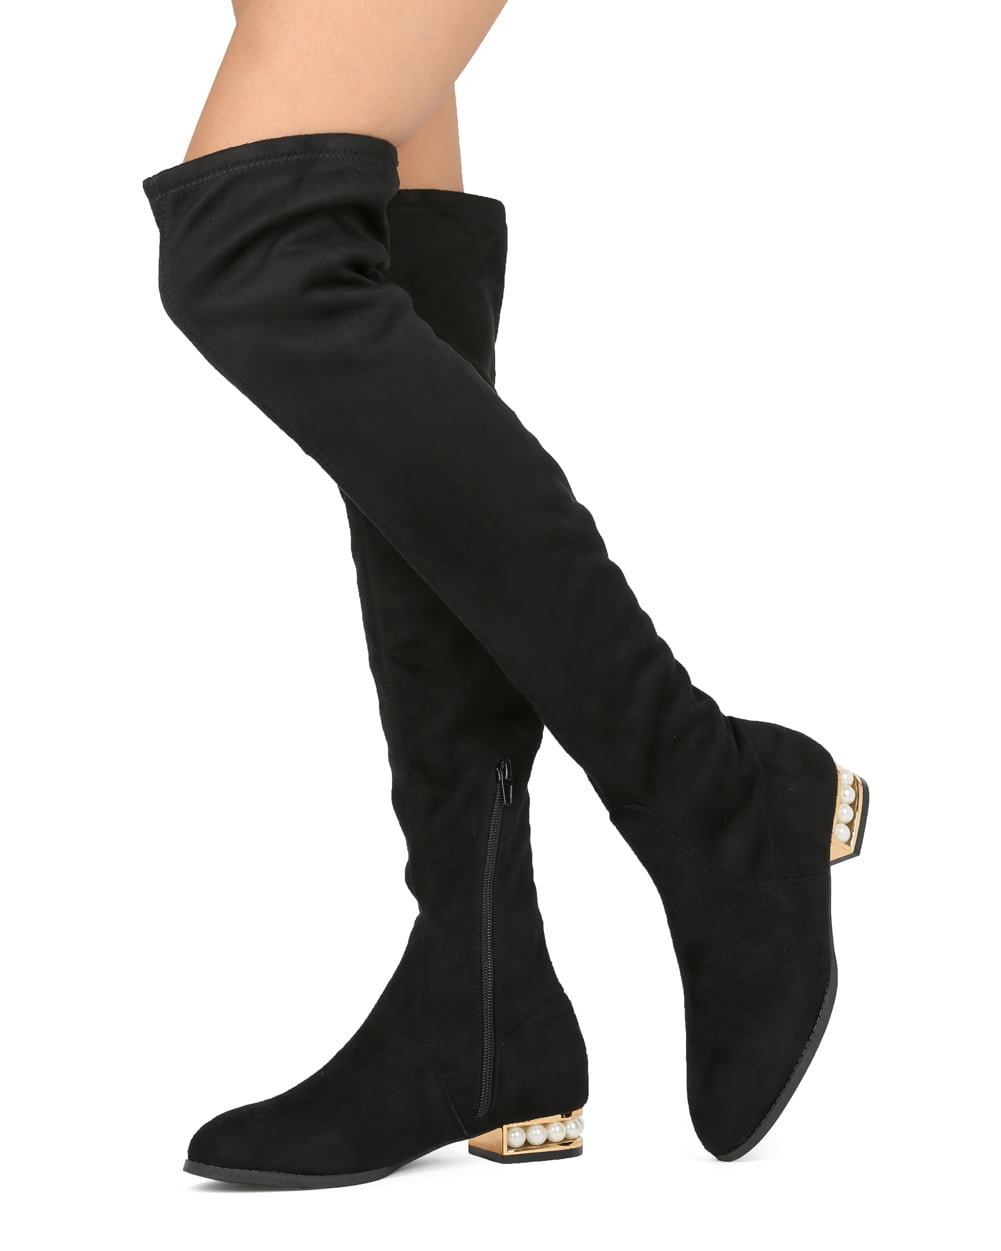 Women's Round Toe Faux Suede Pearl Tassels Over The Knee High Boots Mid Heels 